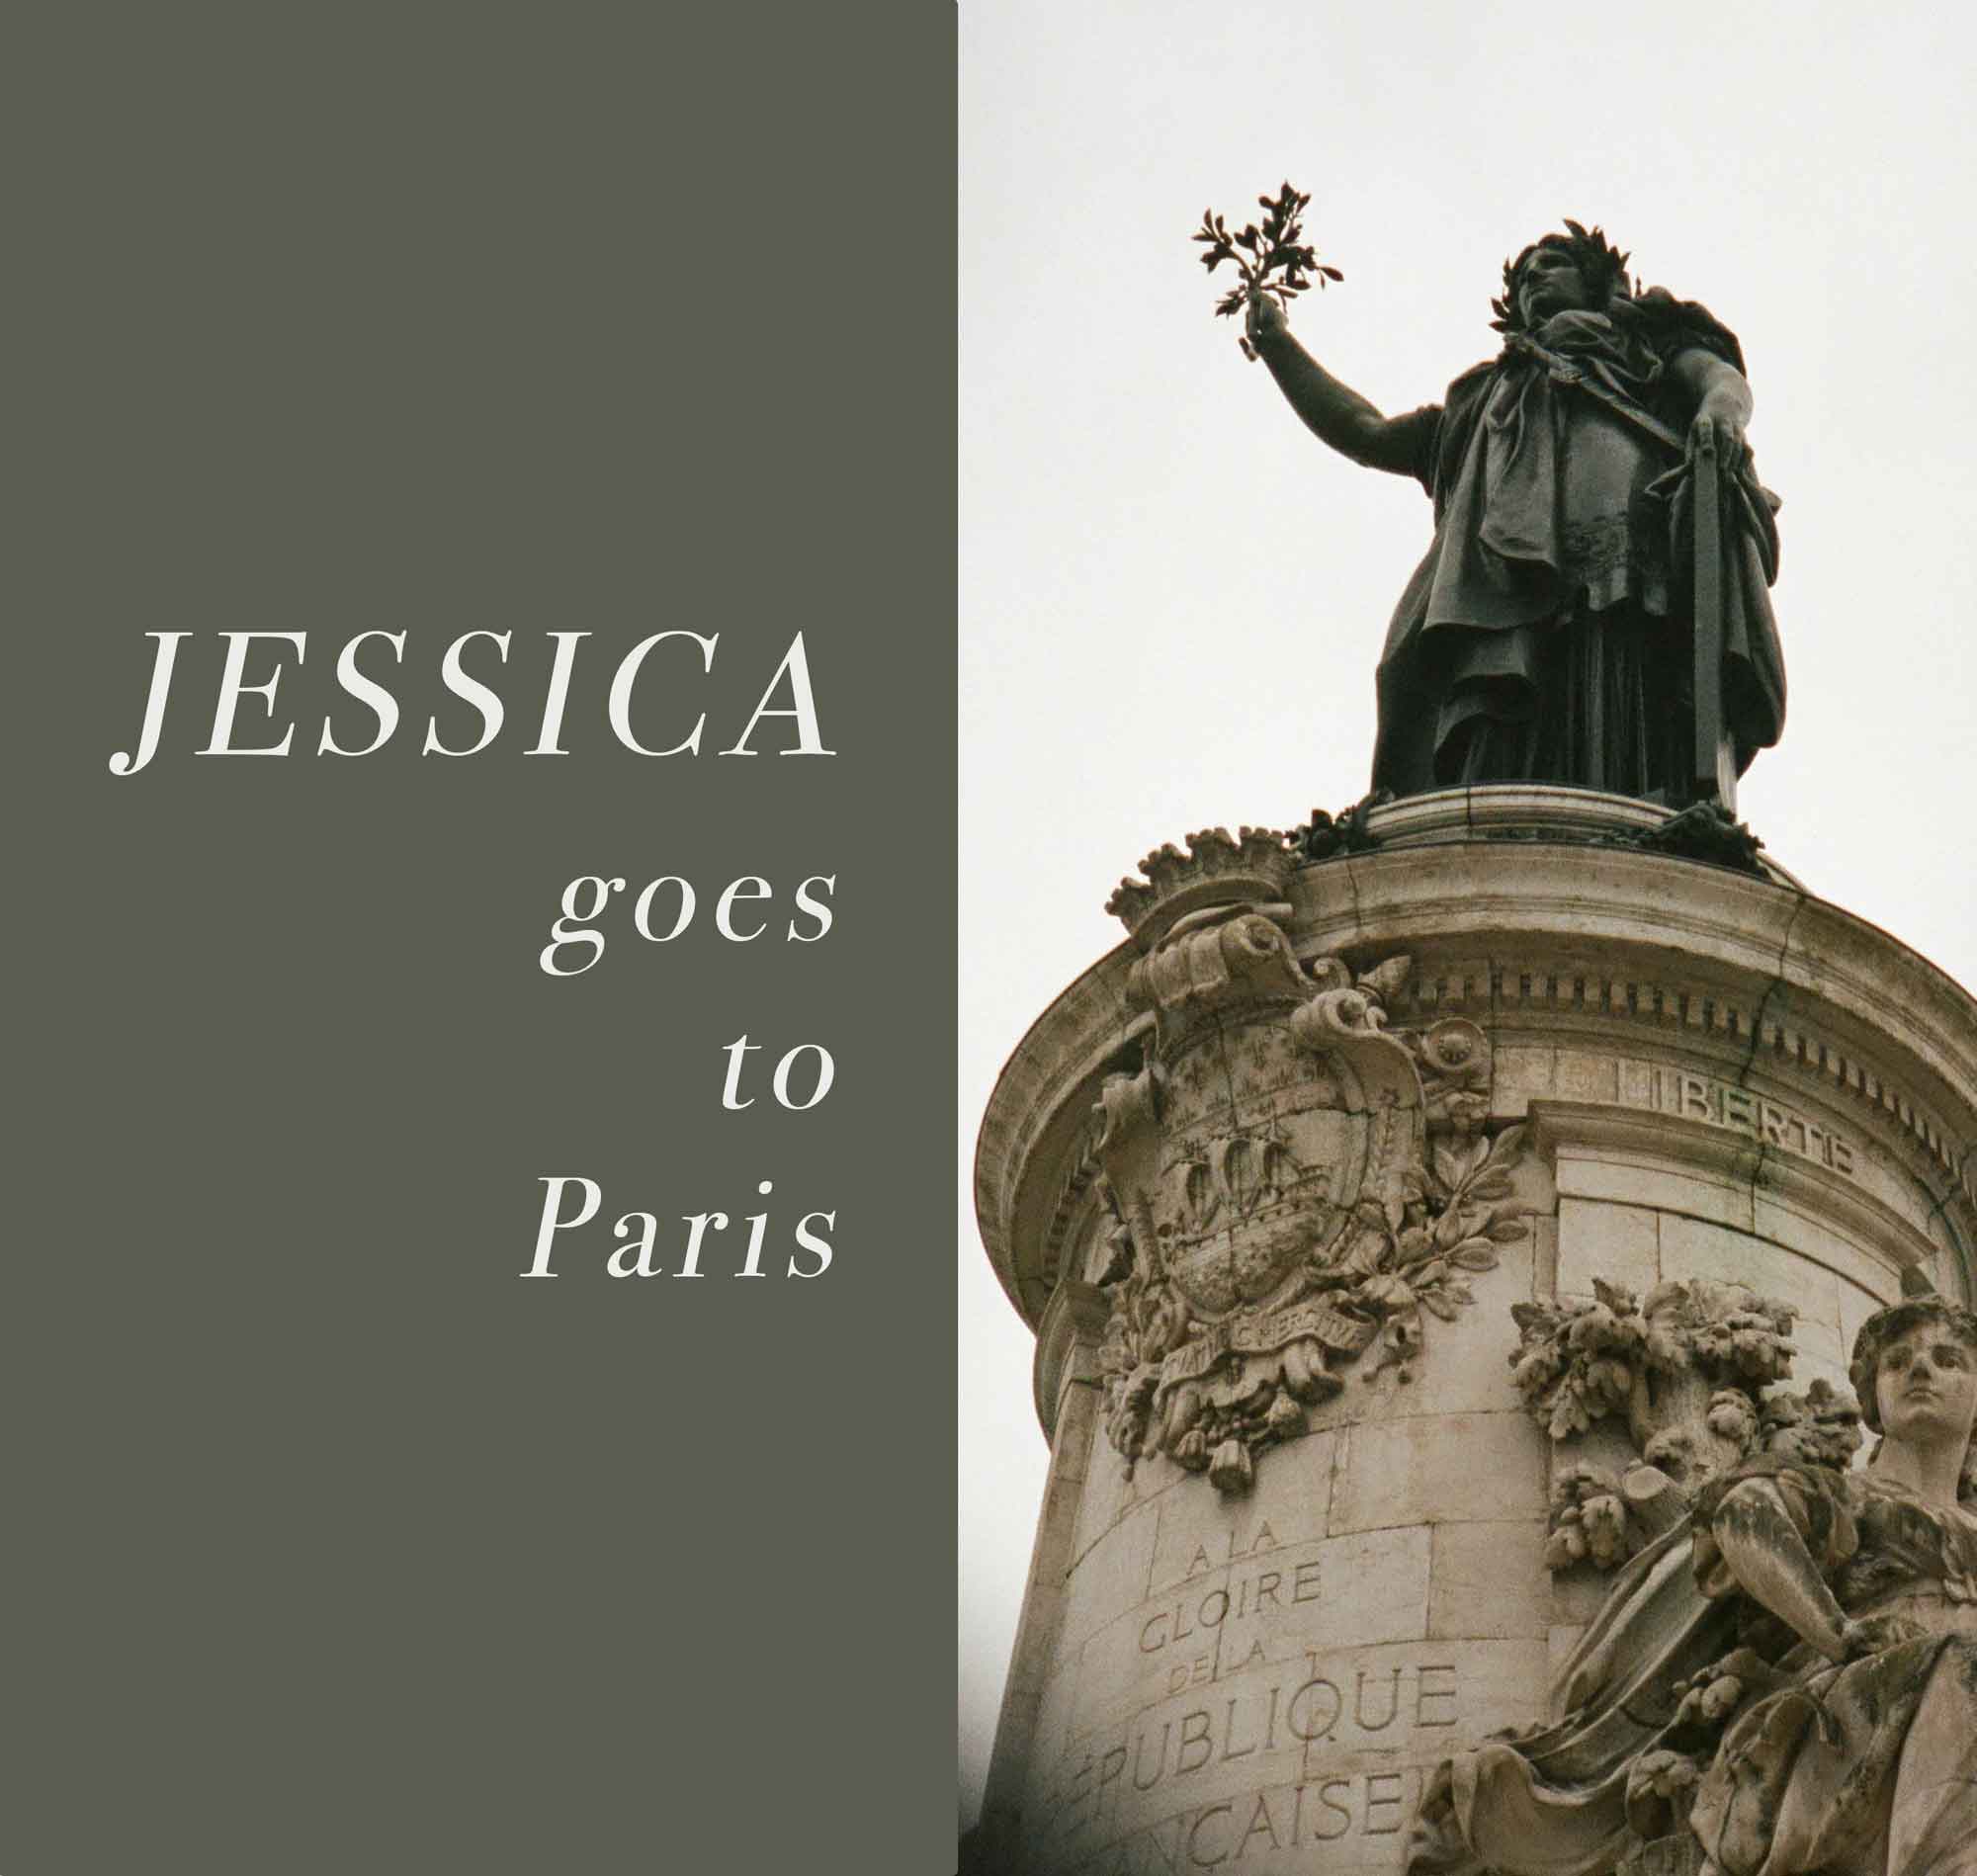 Jessica goes to Paris title featured image